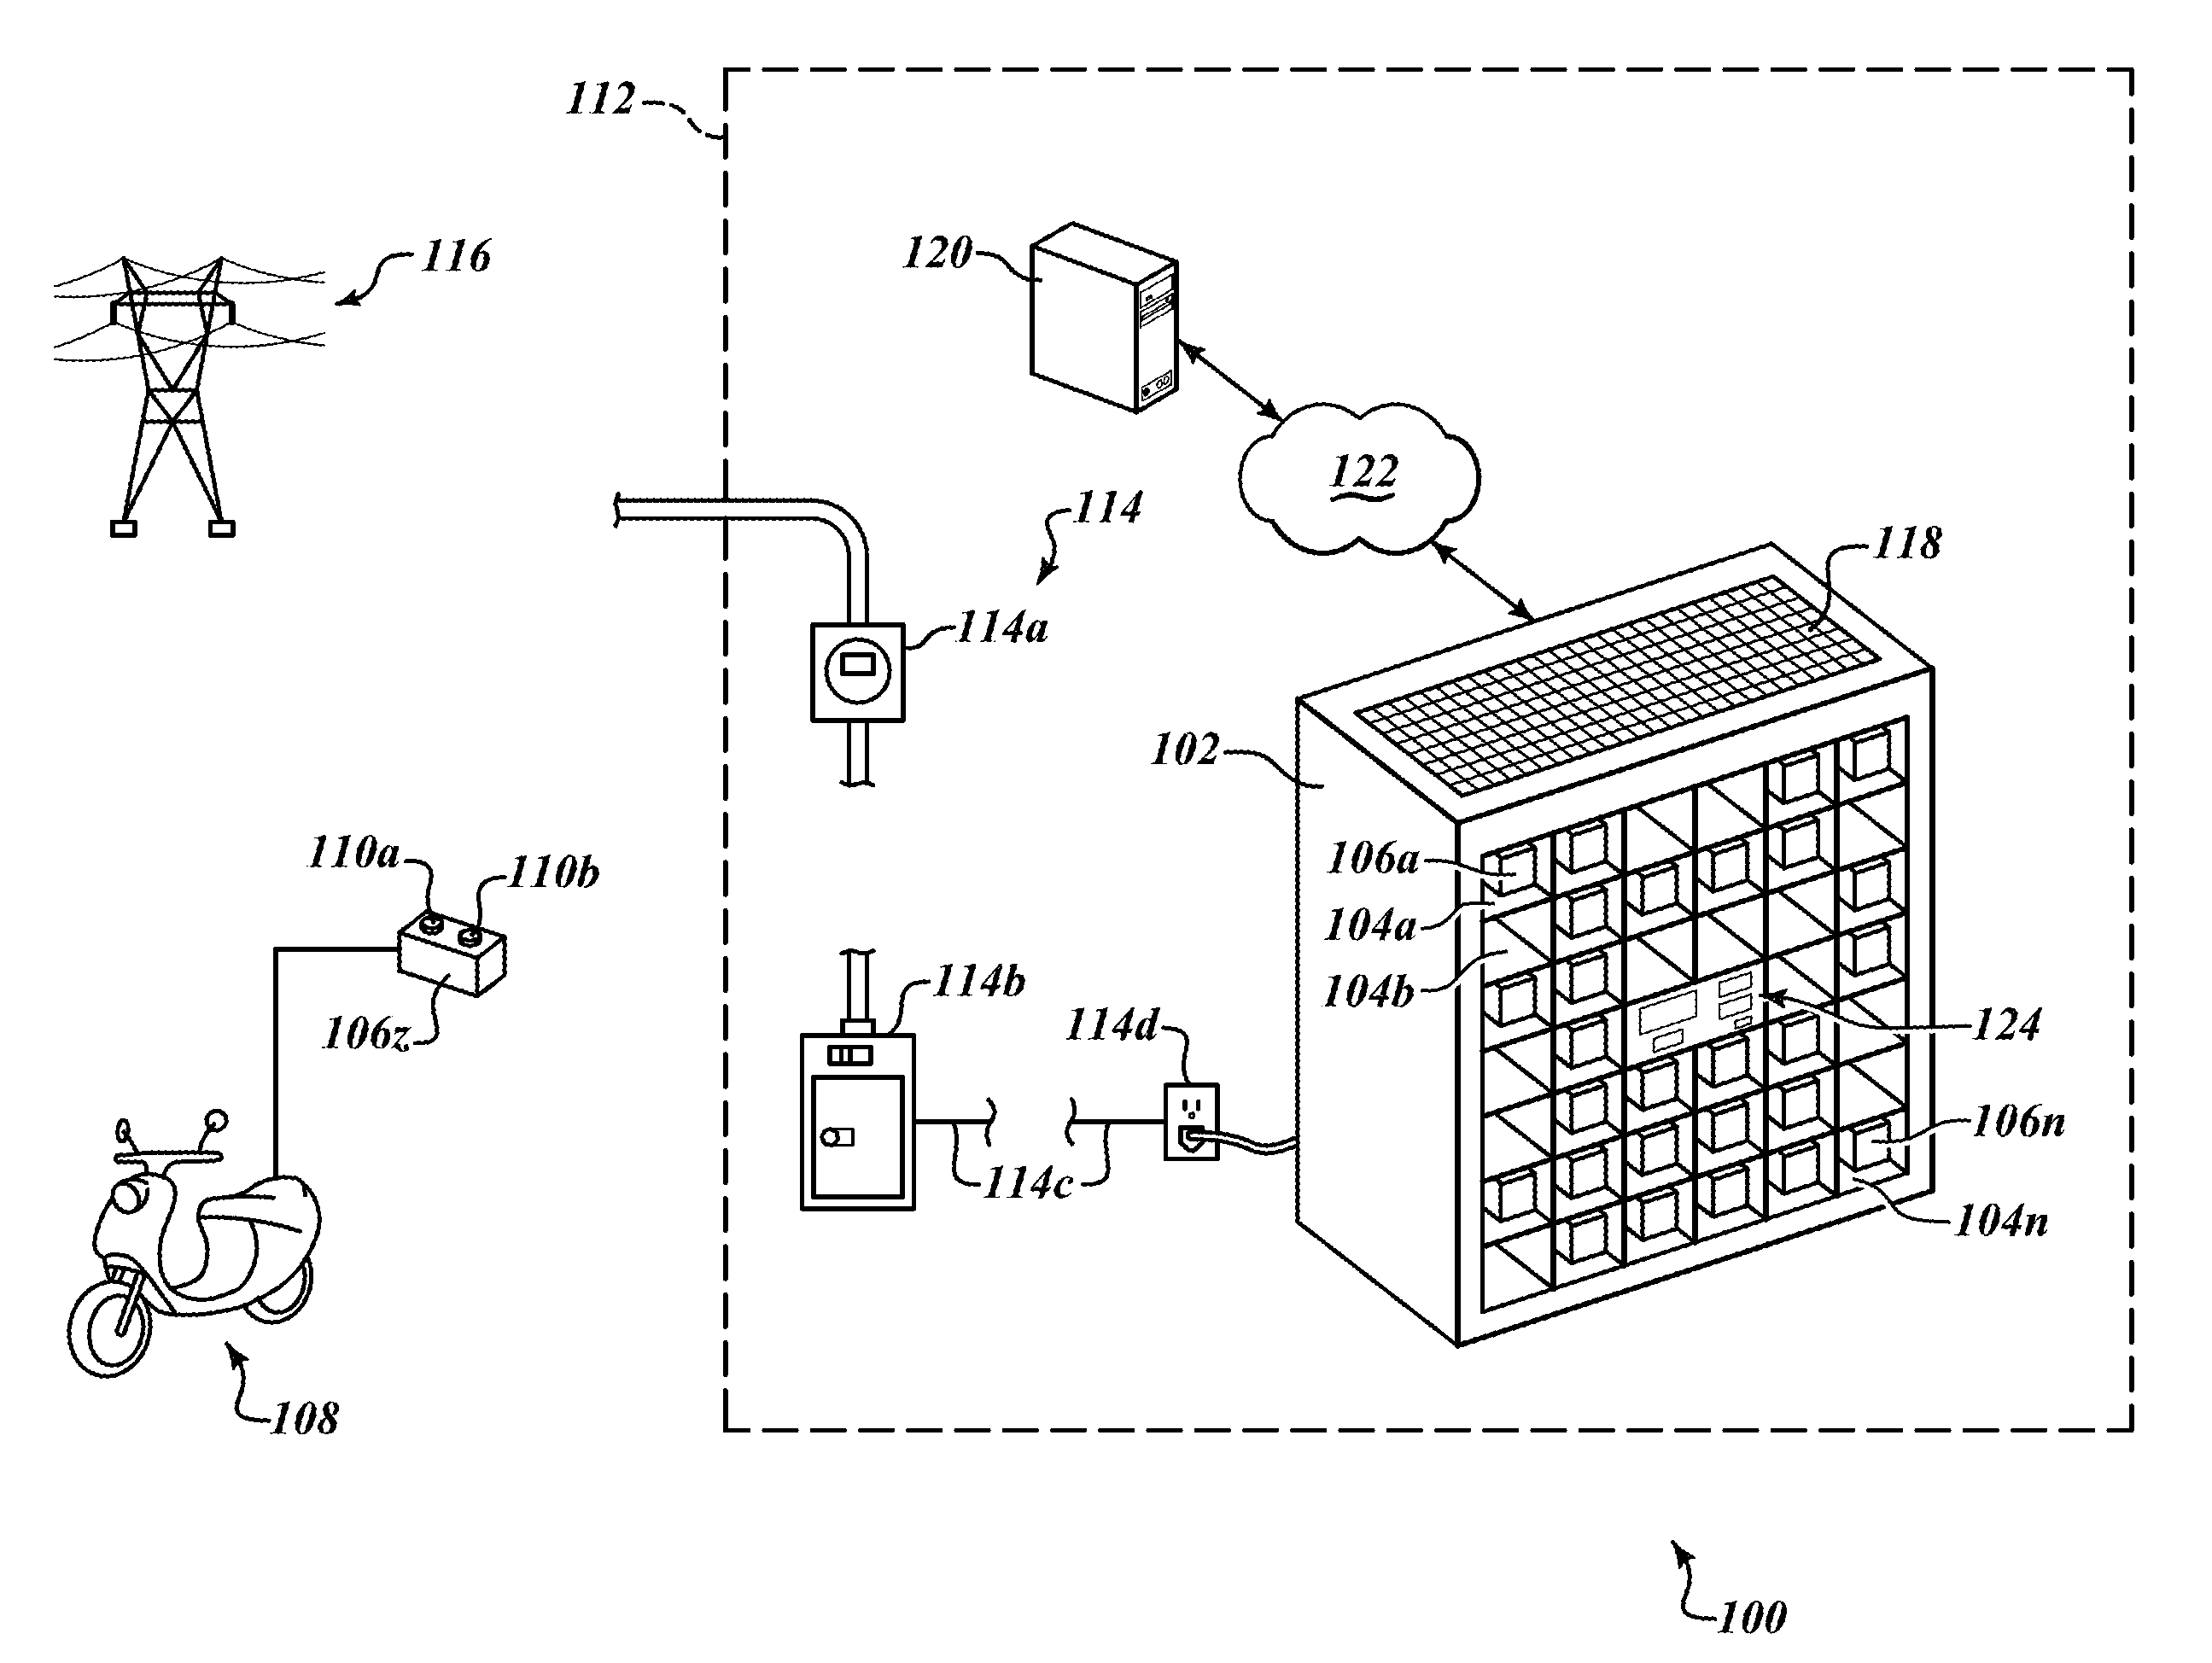 Apparatus, method and article for collection, charging and distributing power storage devices, such as batteries